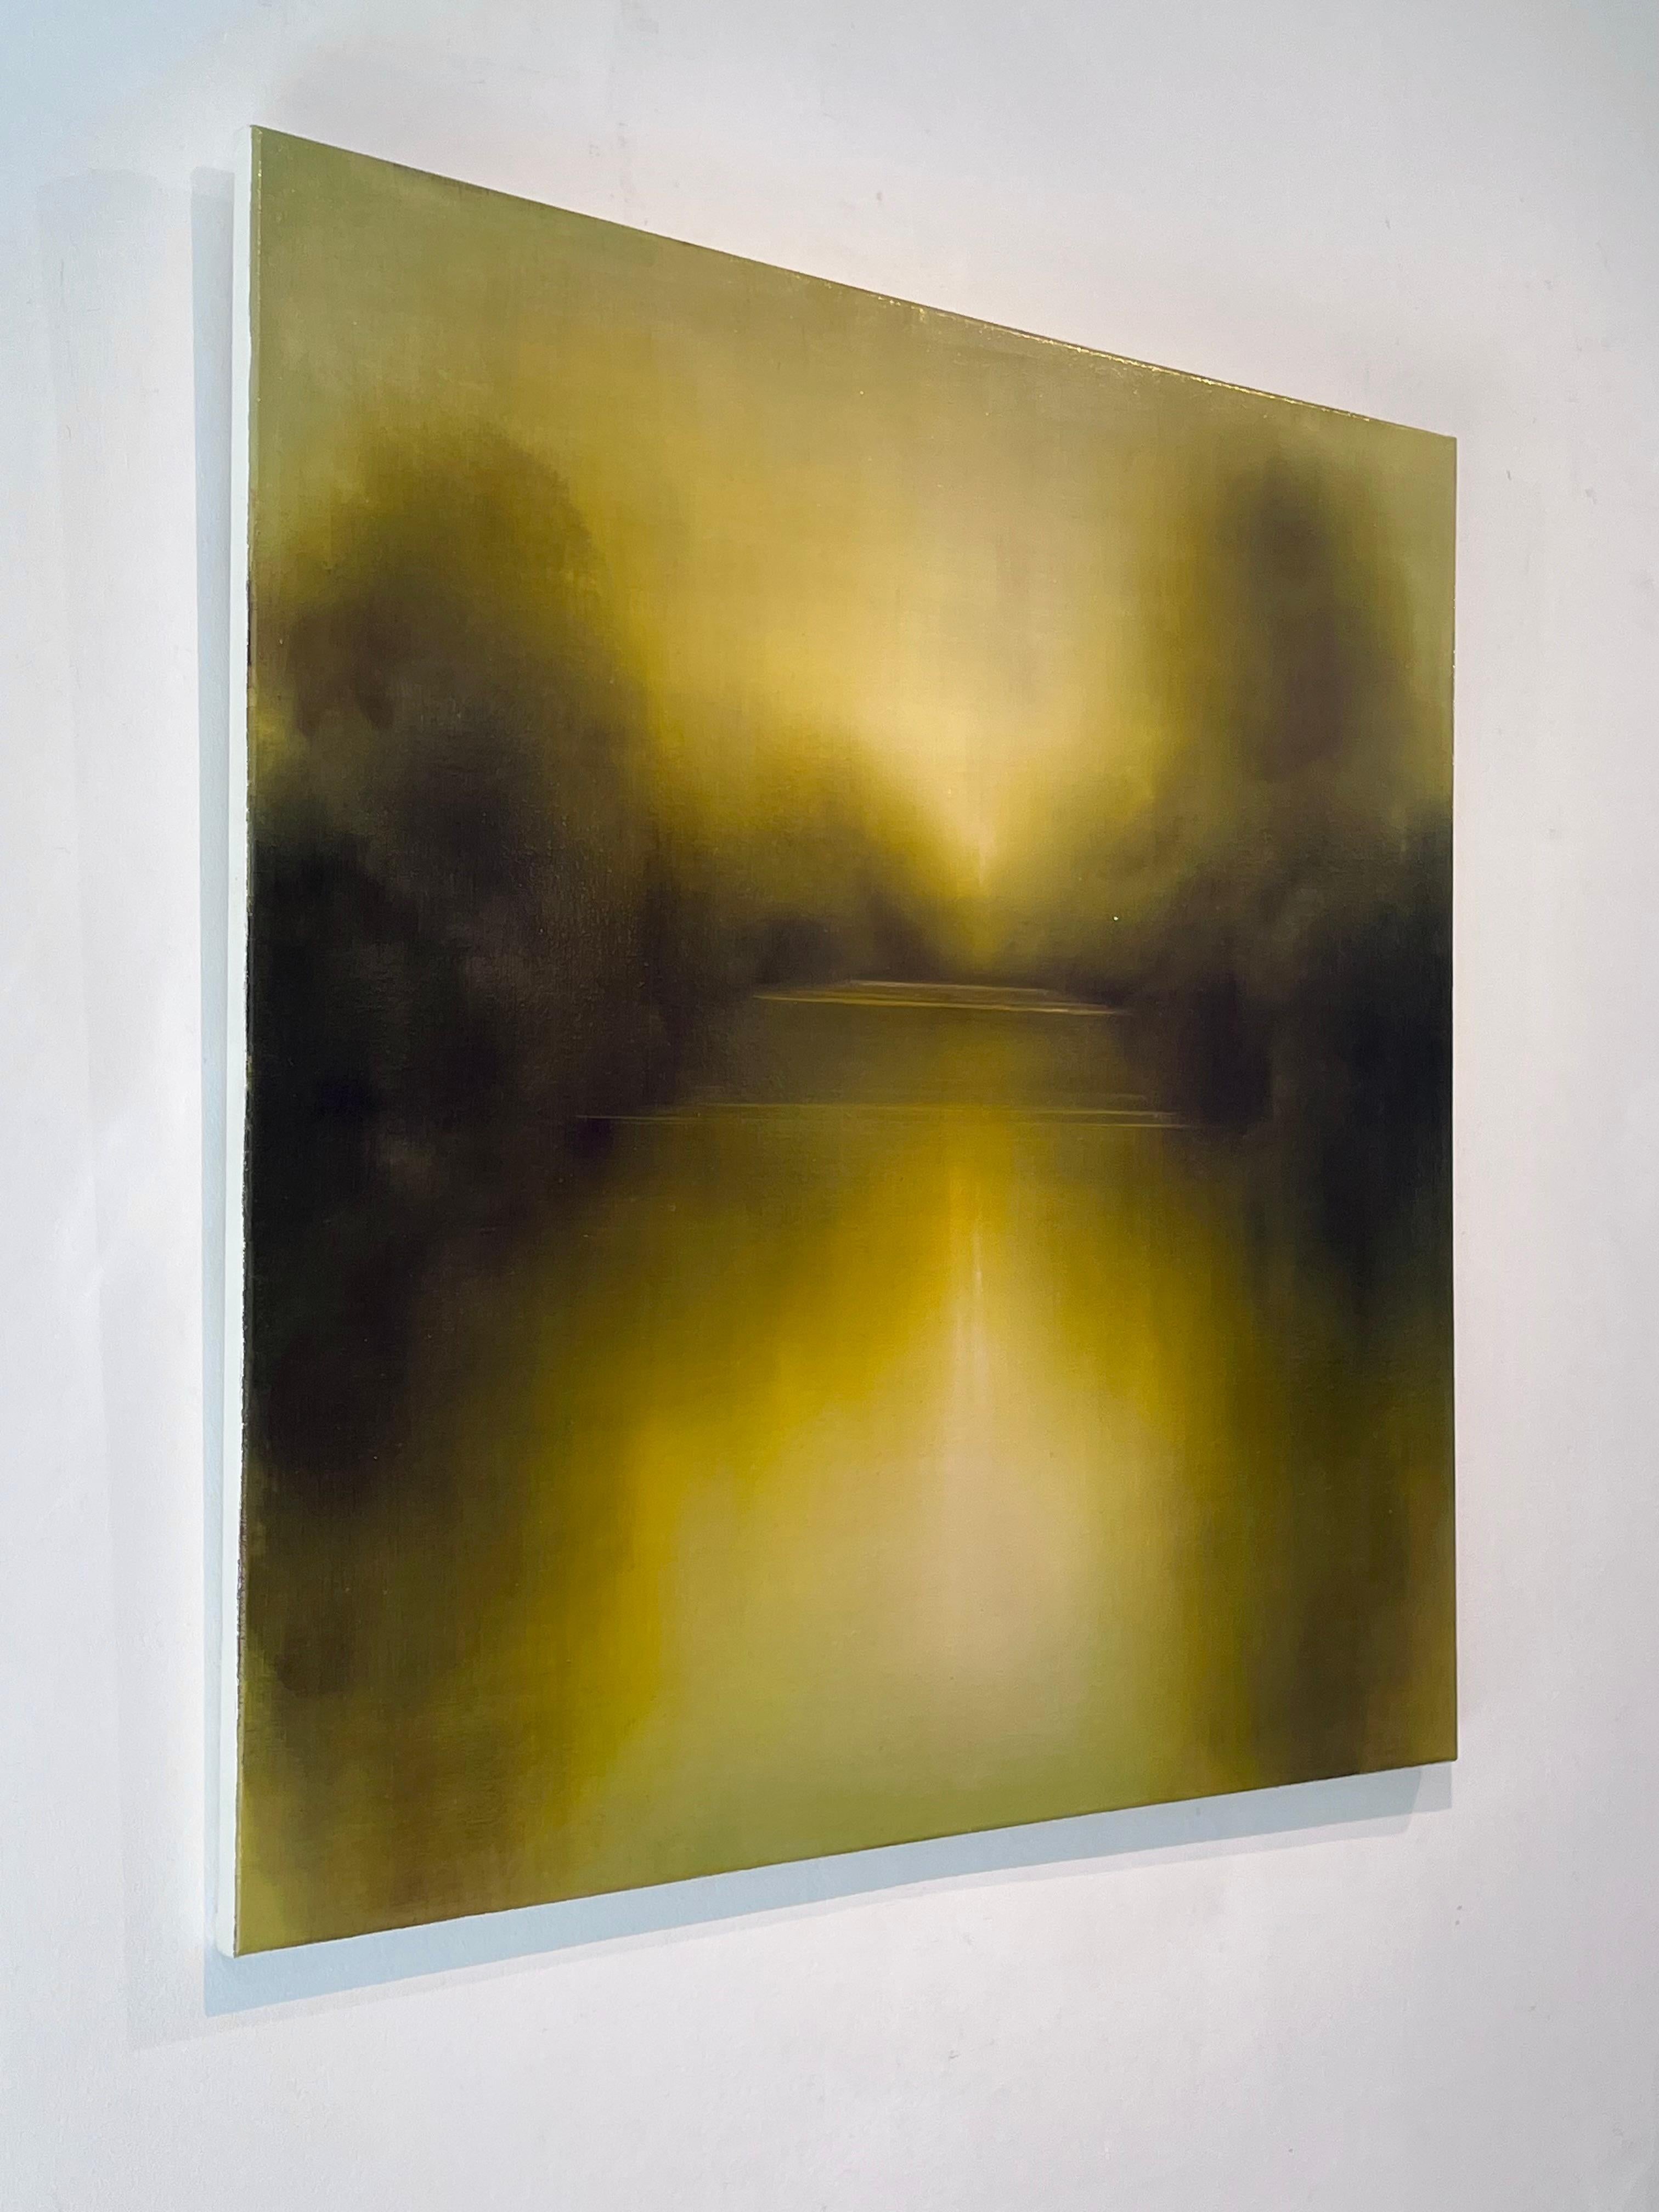 Golden August Waters-original abstract waterscape oil painting-contemporary Art - Abstract Expressionist Painting by Louse Fairchild